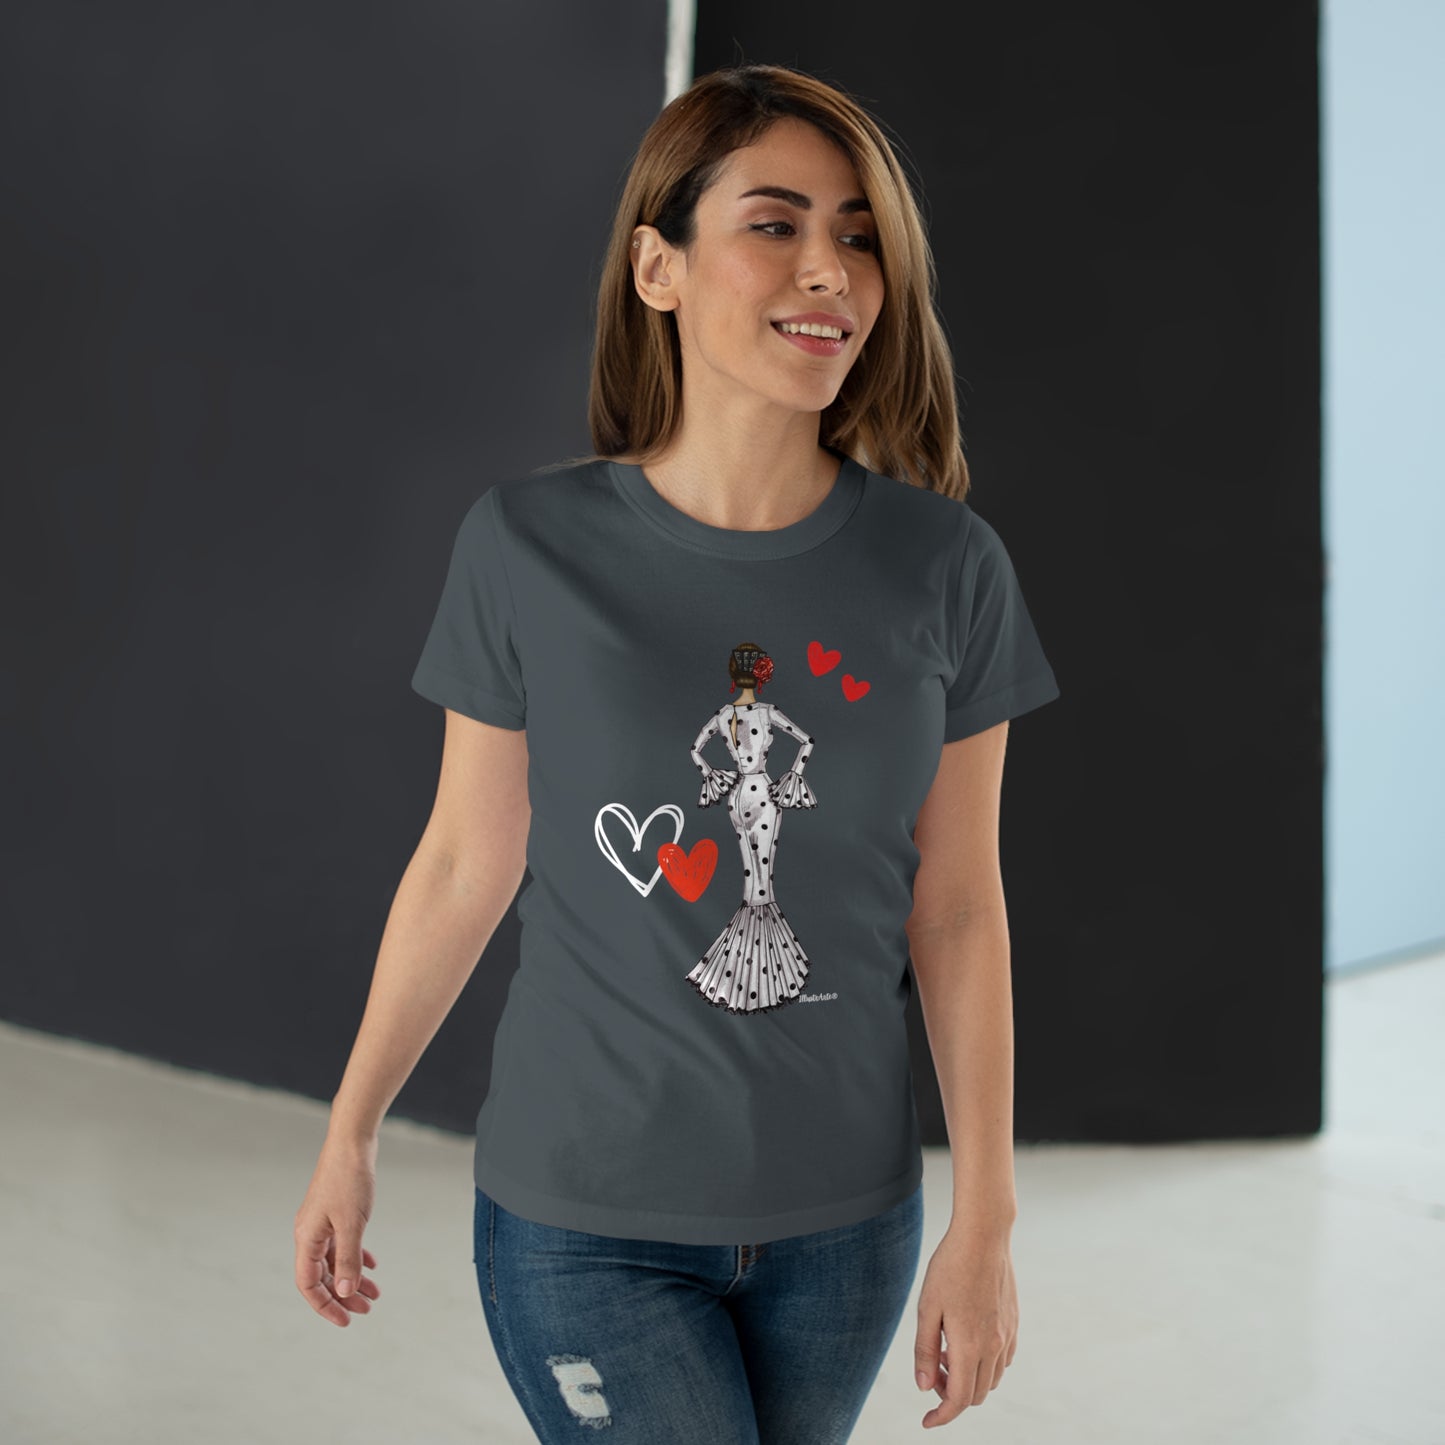 a woman wearing a t - shirt with a heart on it